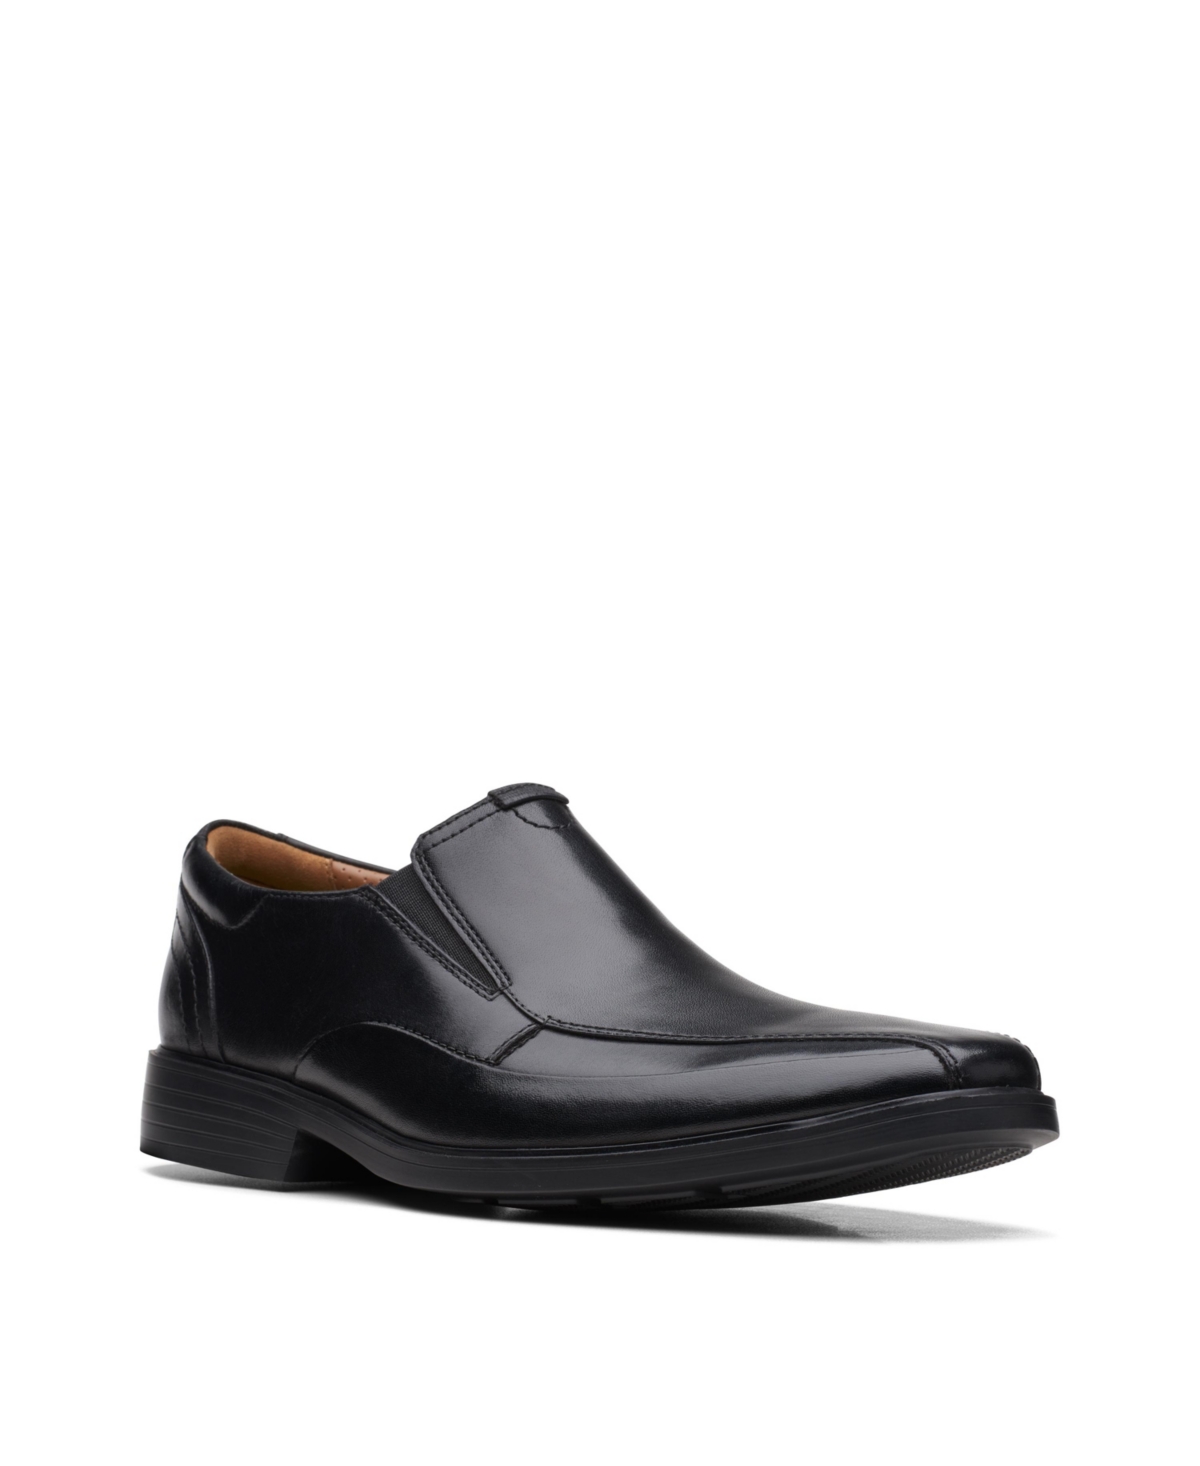 Clarks Men's Collection Lite Ave Comfort Shoes In Black Leather